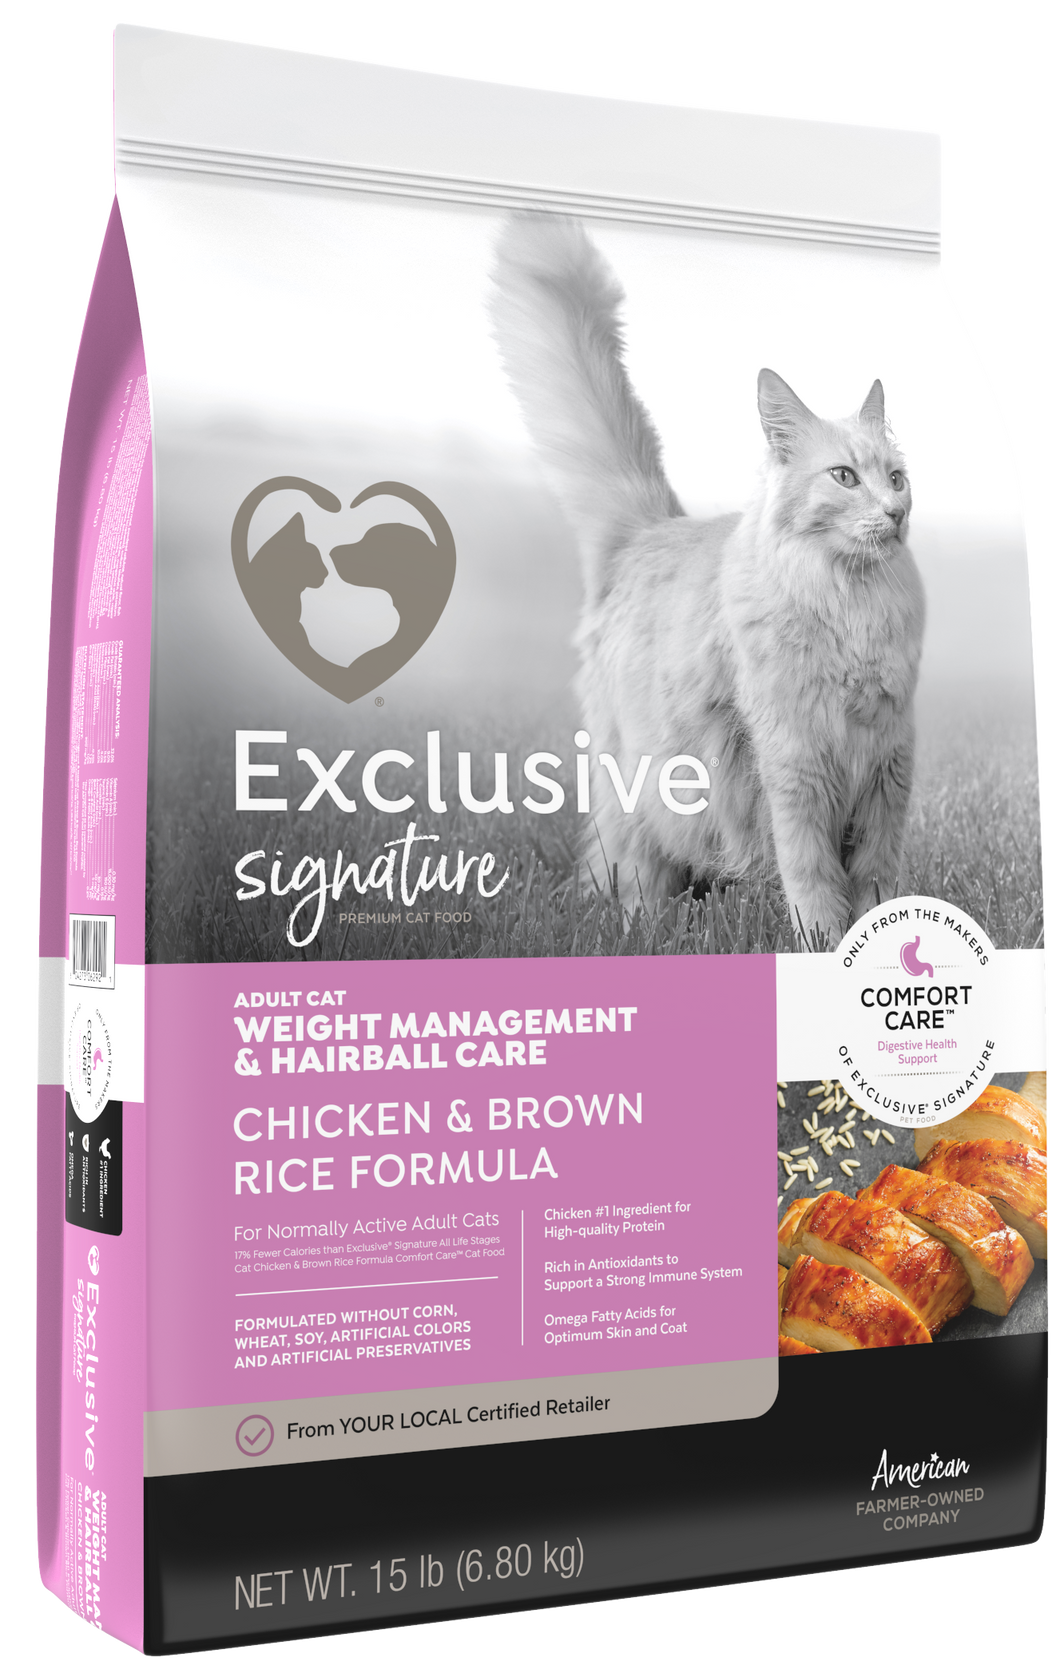 Exclusive Signature Hairball and Weight Control Cat Food